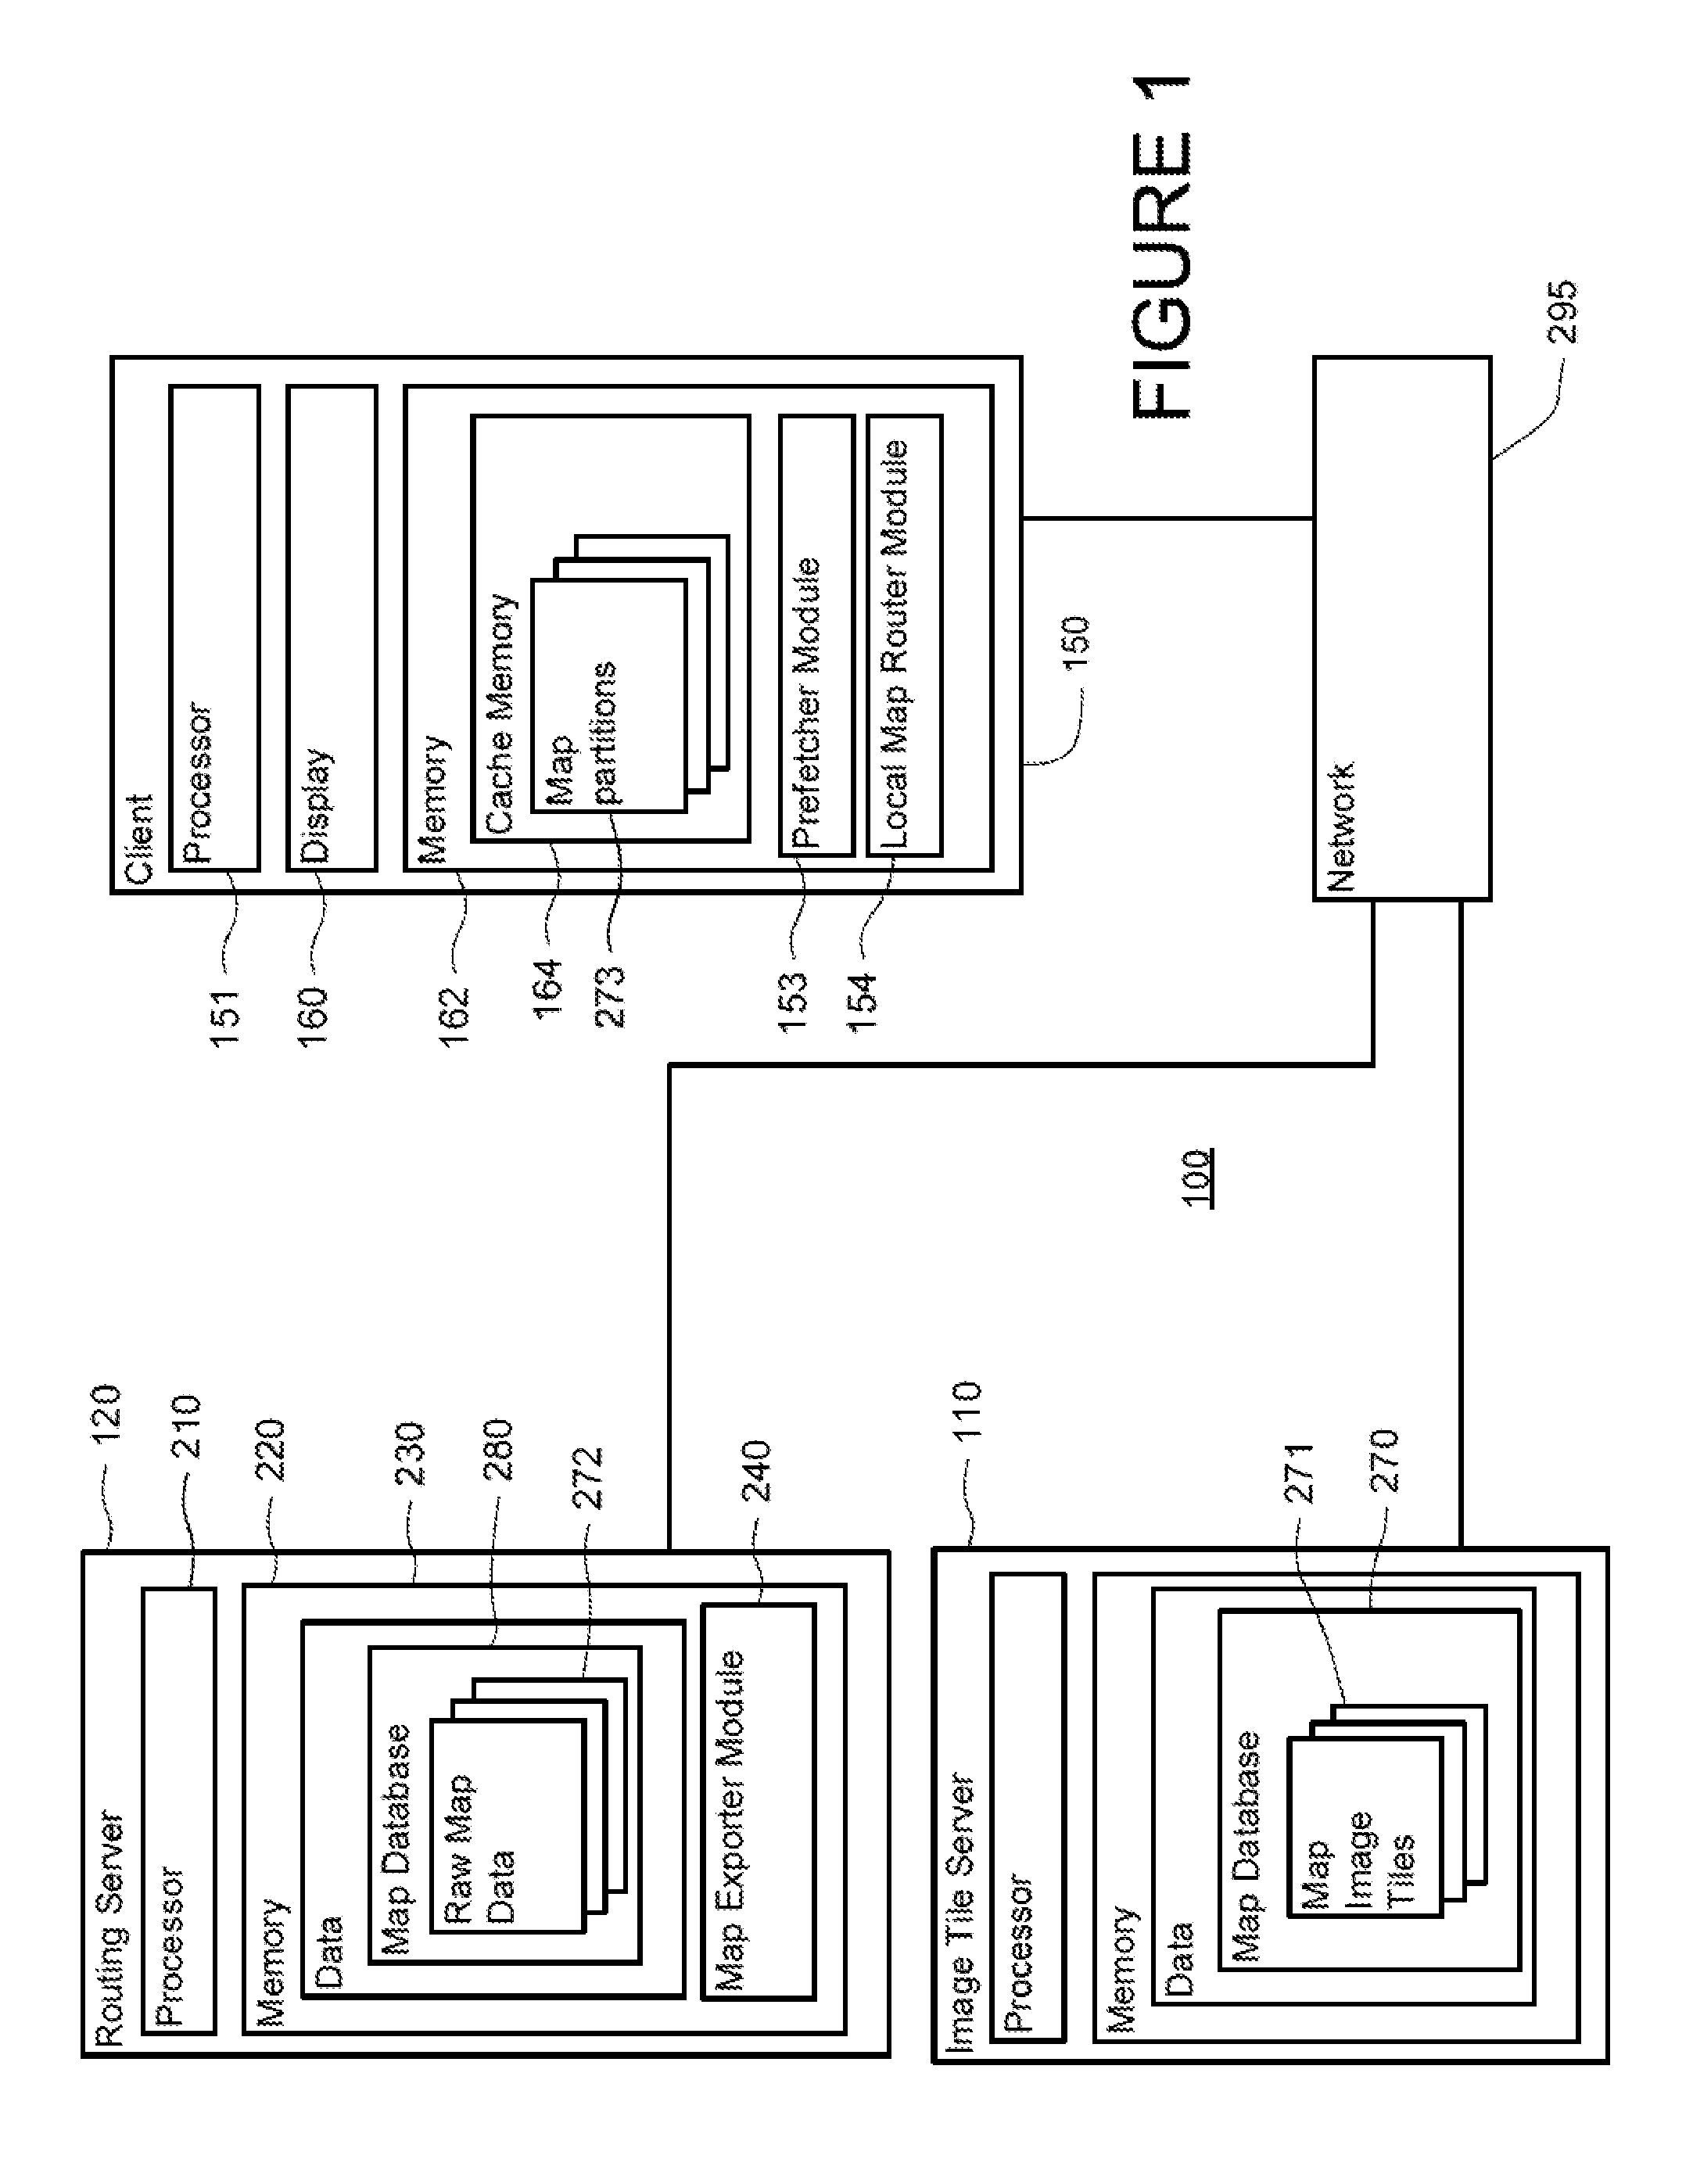 Method and apparatus of route guidance